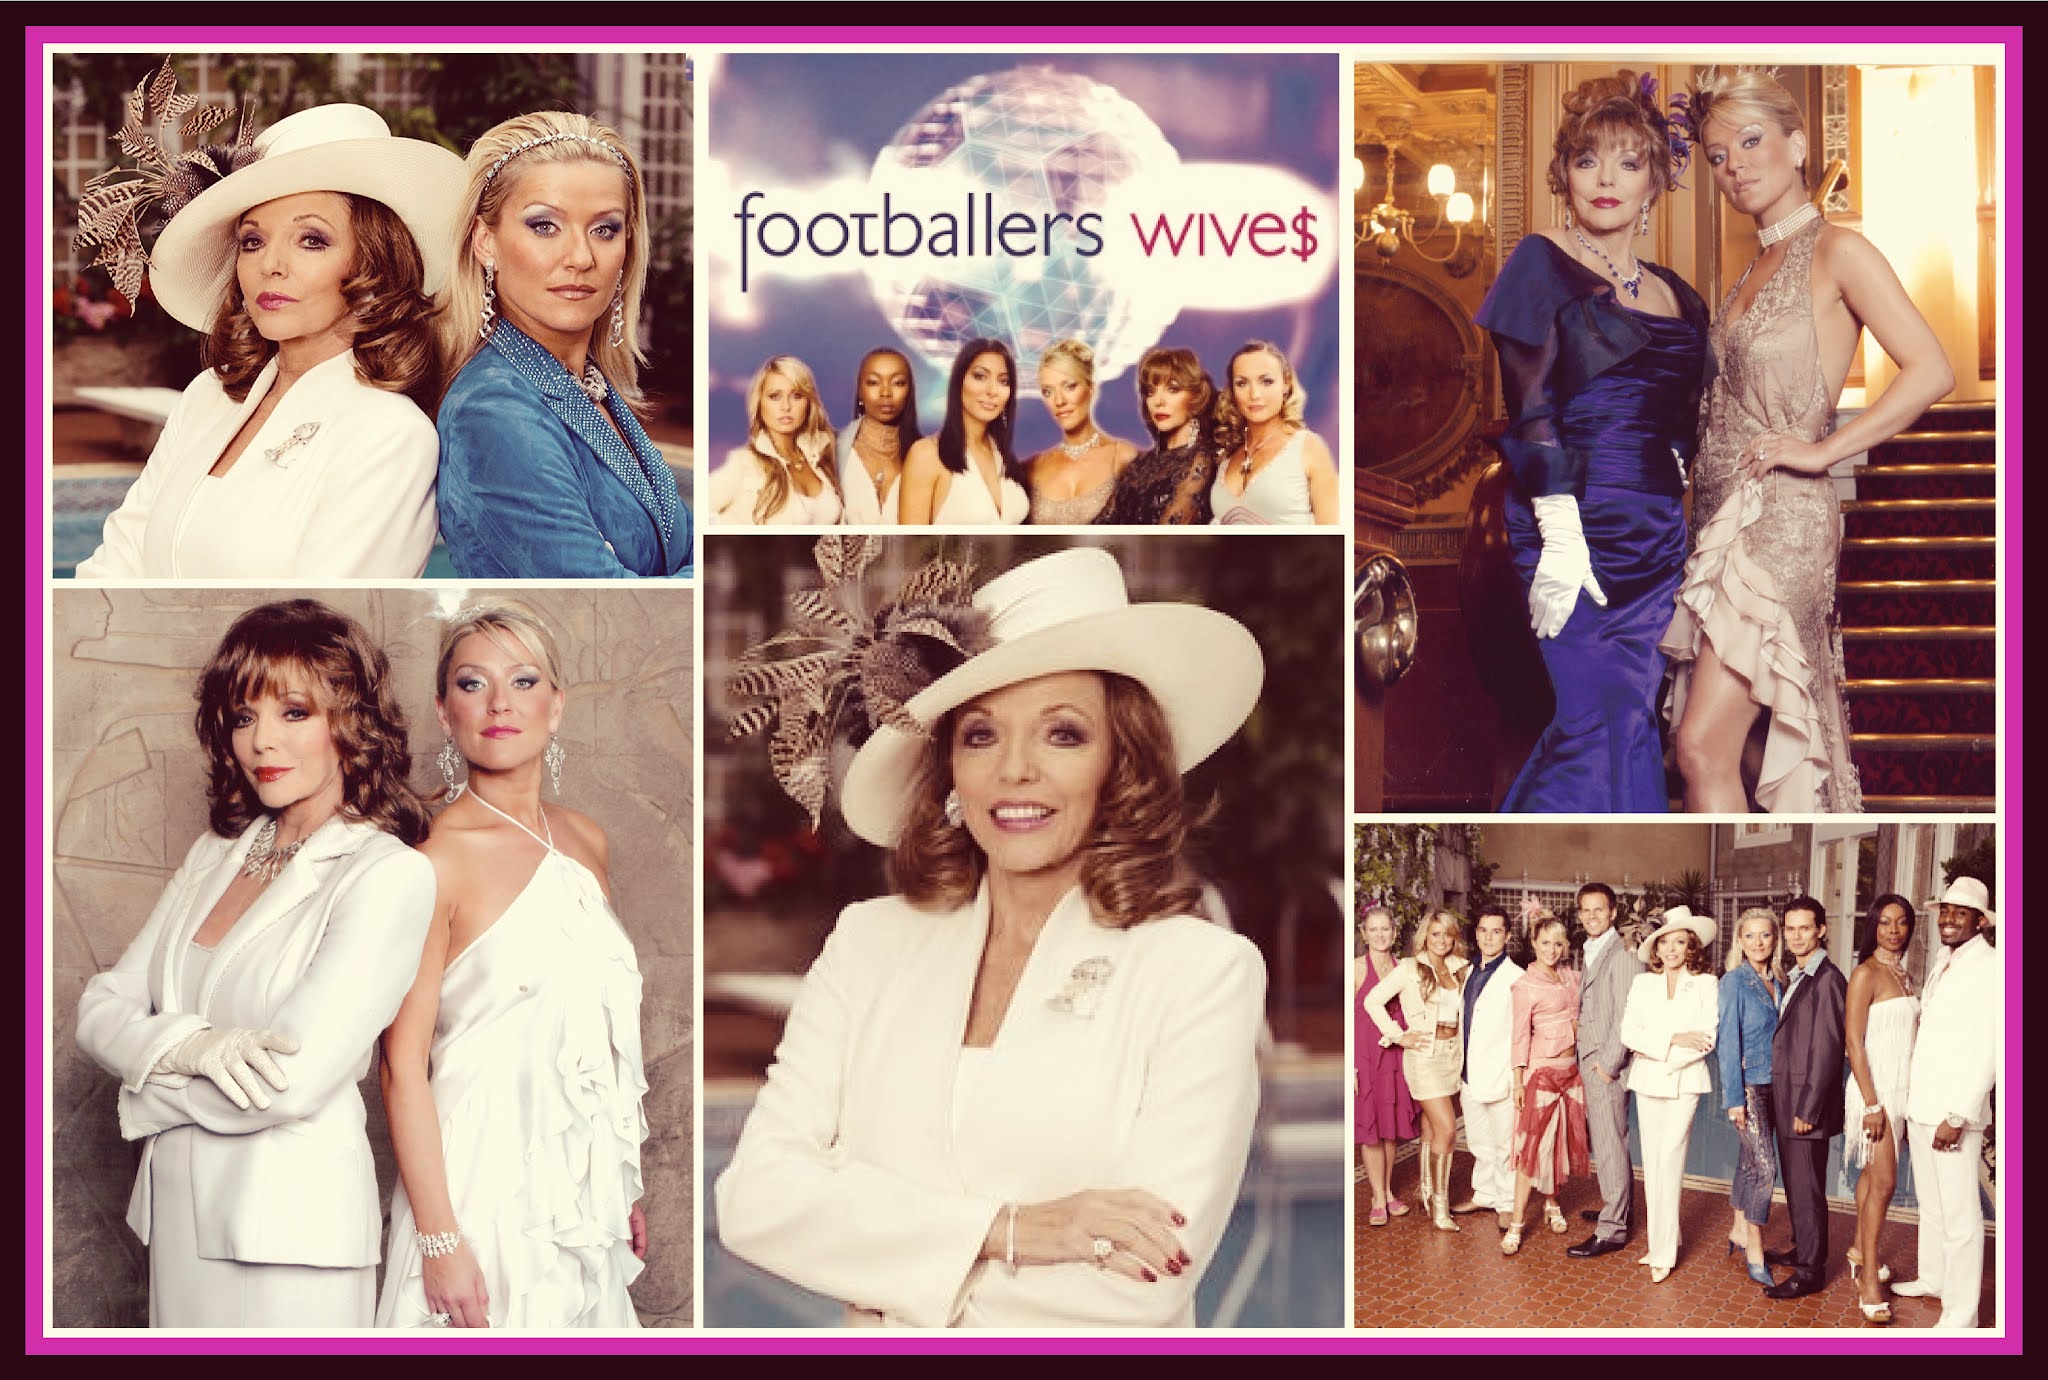 LEGENDARY DAME! CELEBRATING 70 YEARS! FOOTBALLERS WIVES .. ITV / CARLTON TELEVISION .